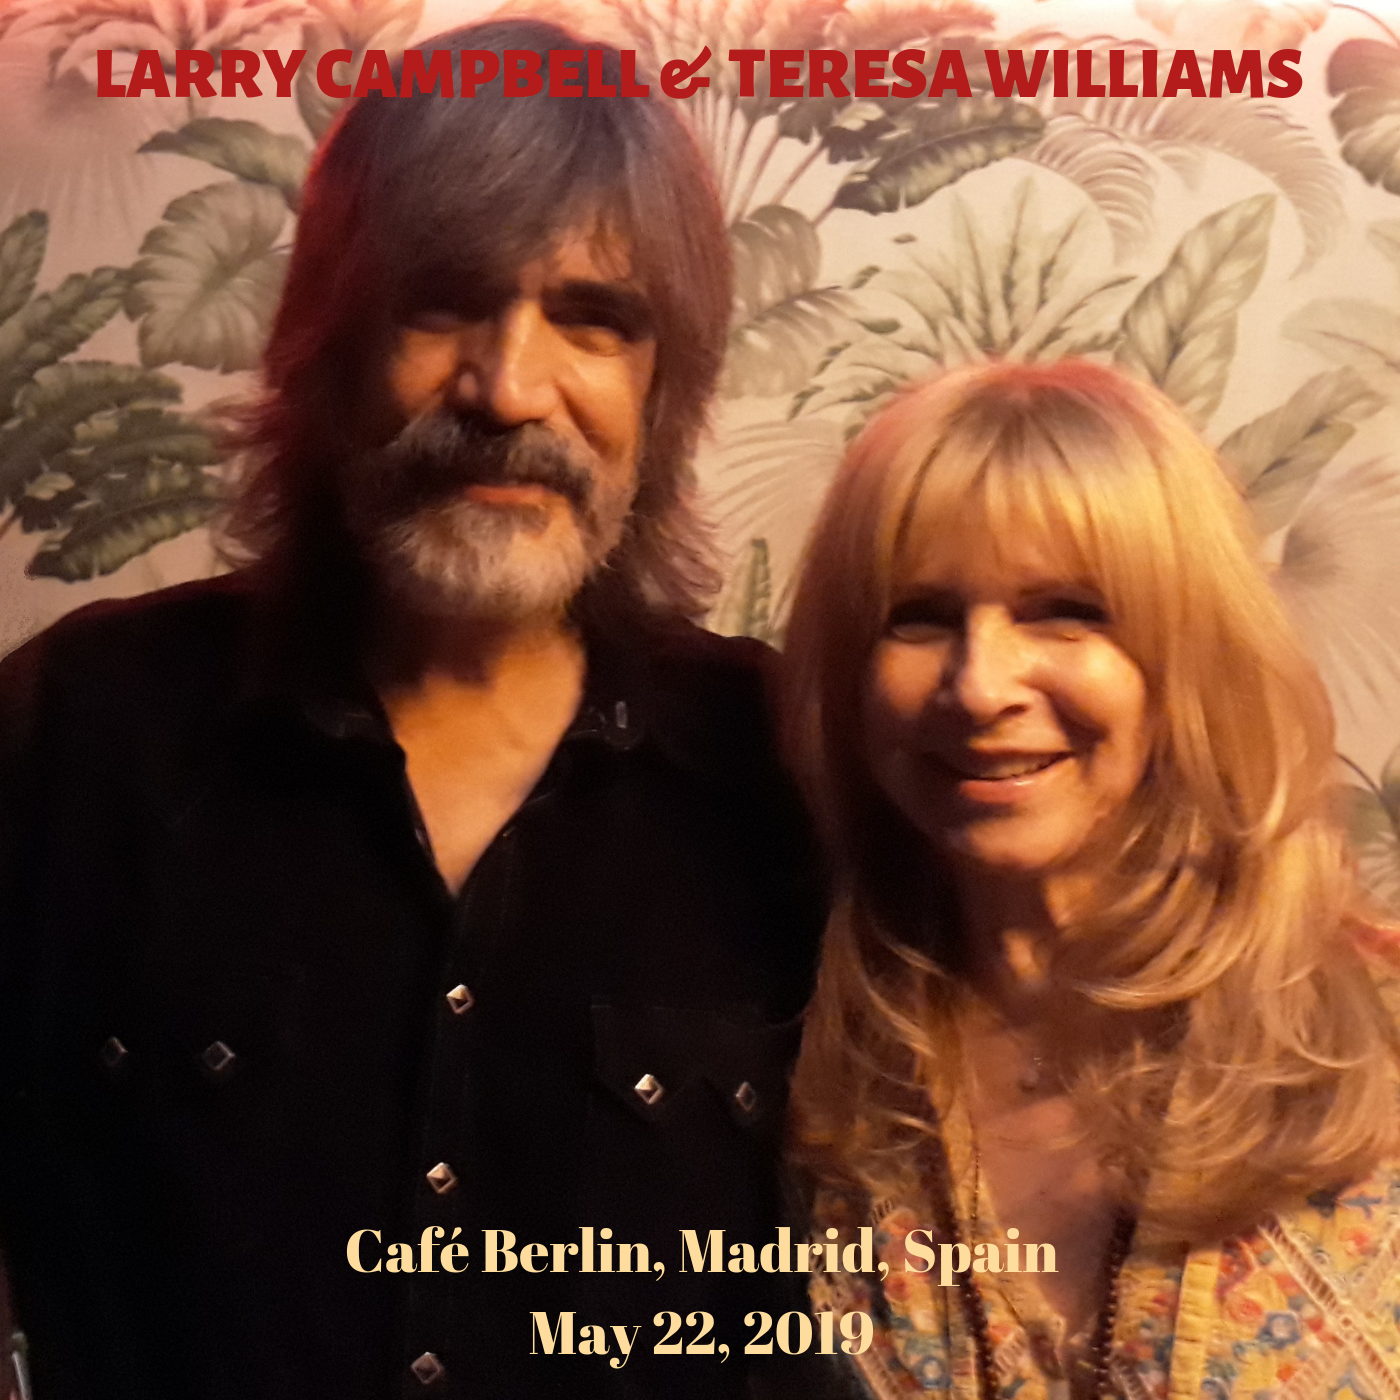 LarryCampbellTeresaWilliams2019-05-22CafeBerlinMadridSpain (4).png